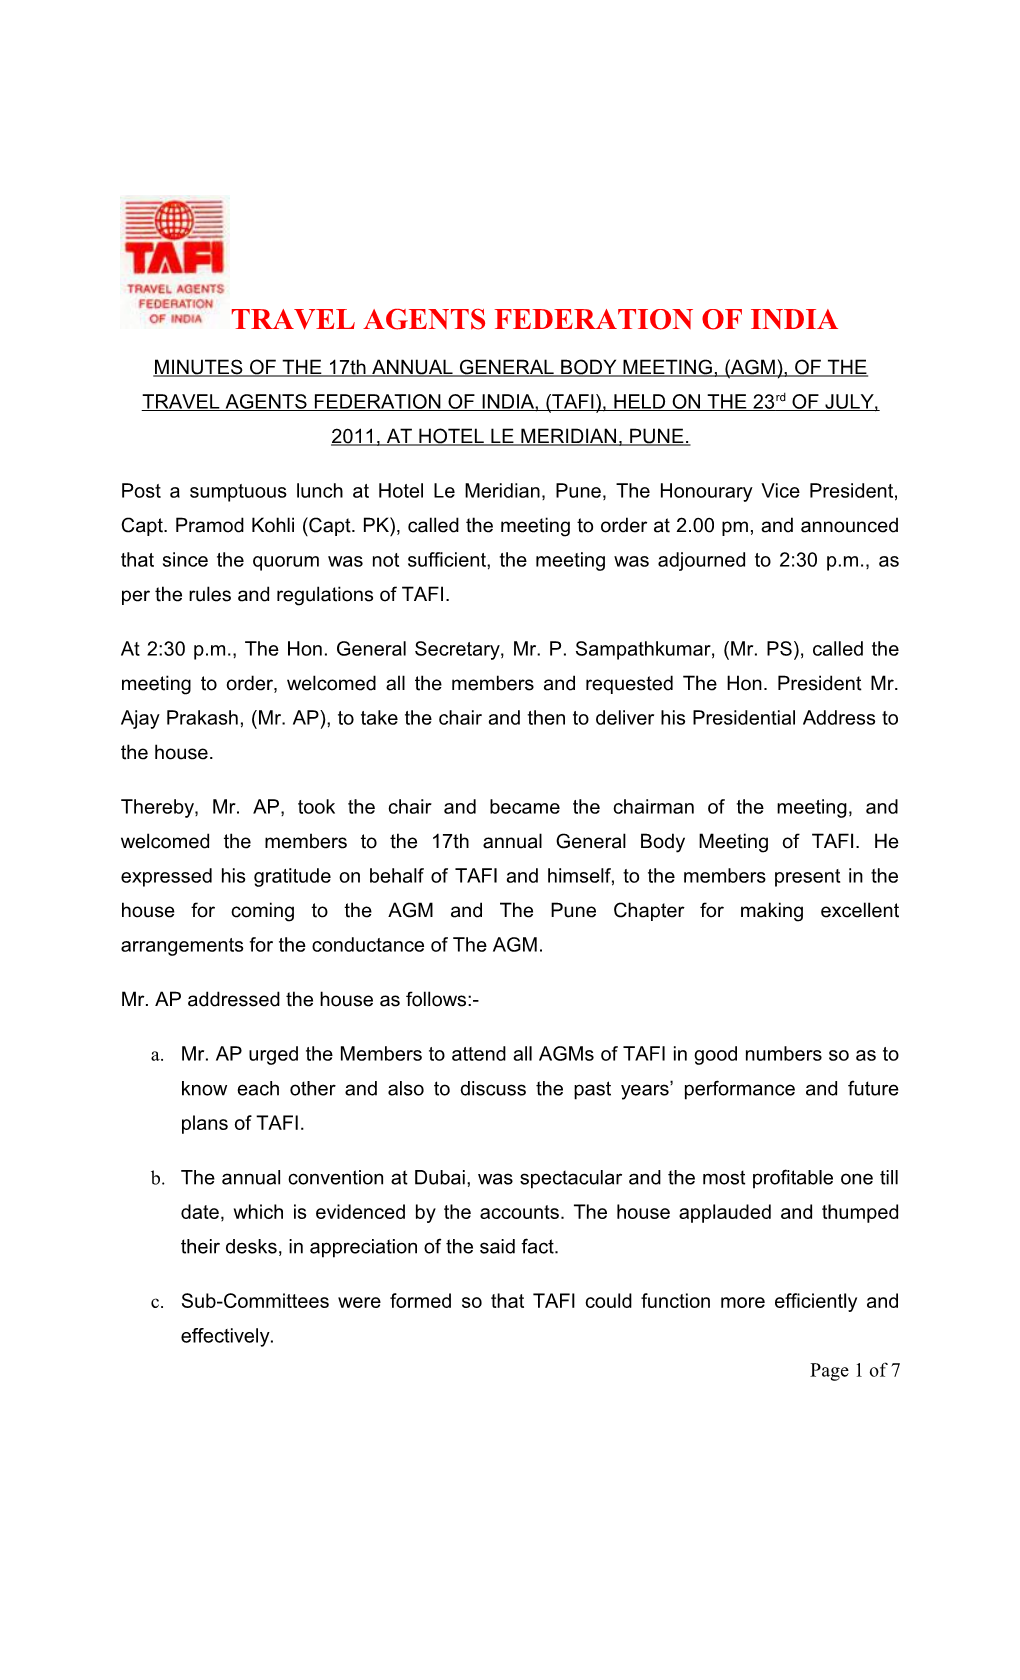 Minutes of the Extraordinary General Body Meeting of the Travel Agents Federation of India